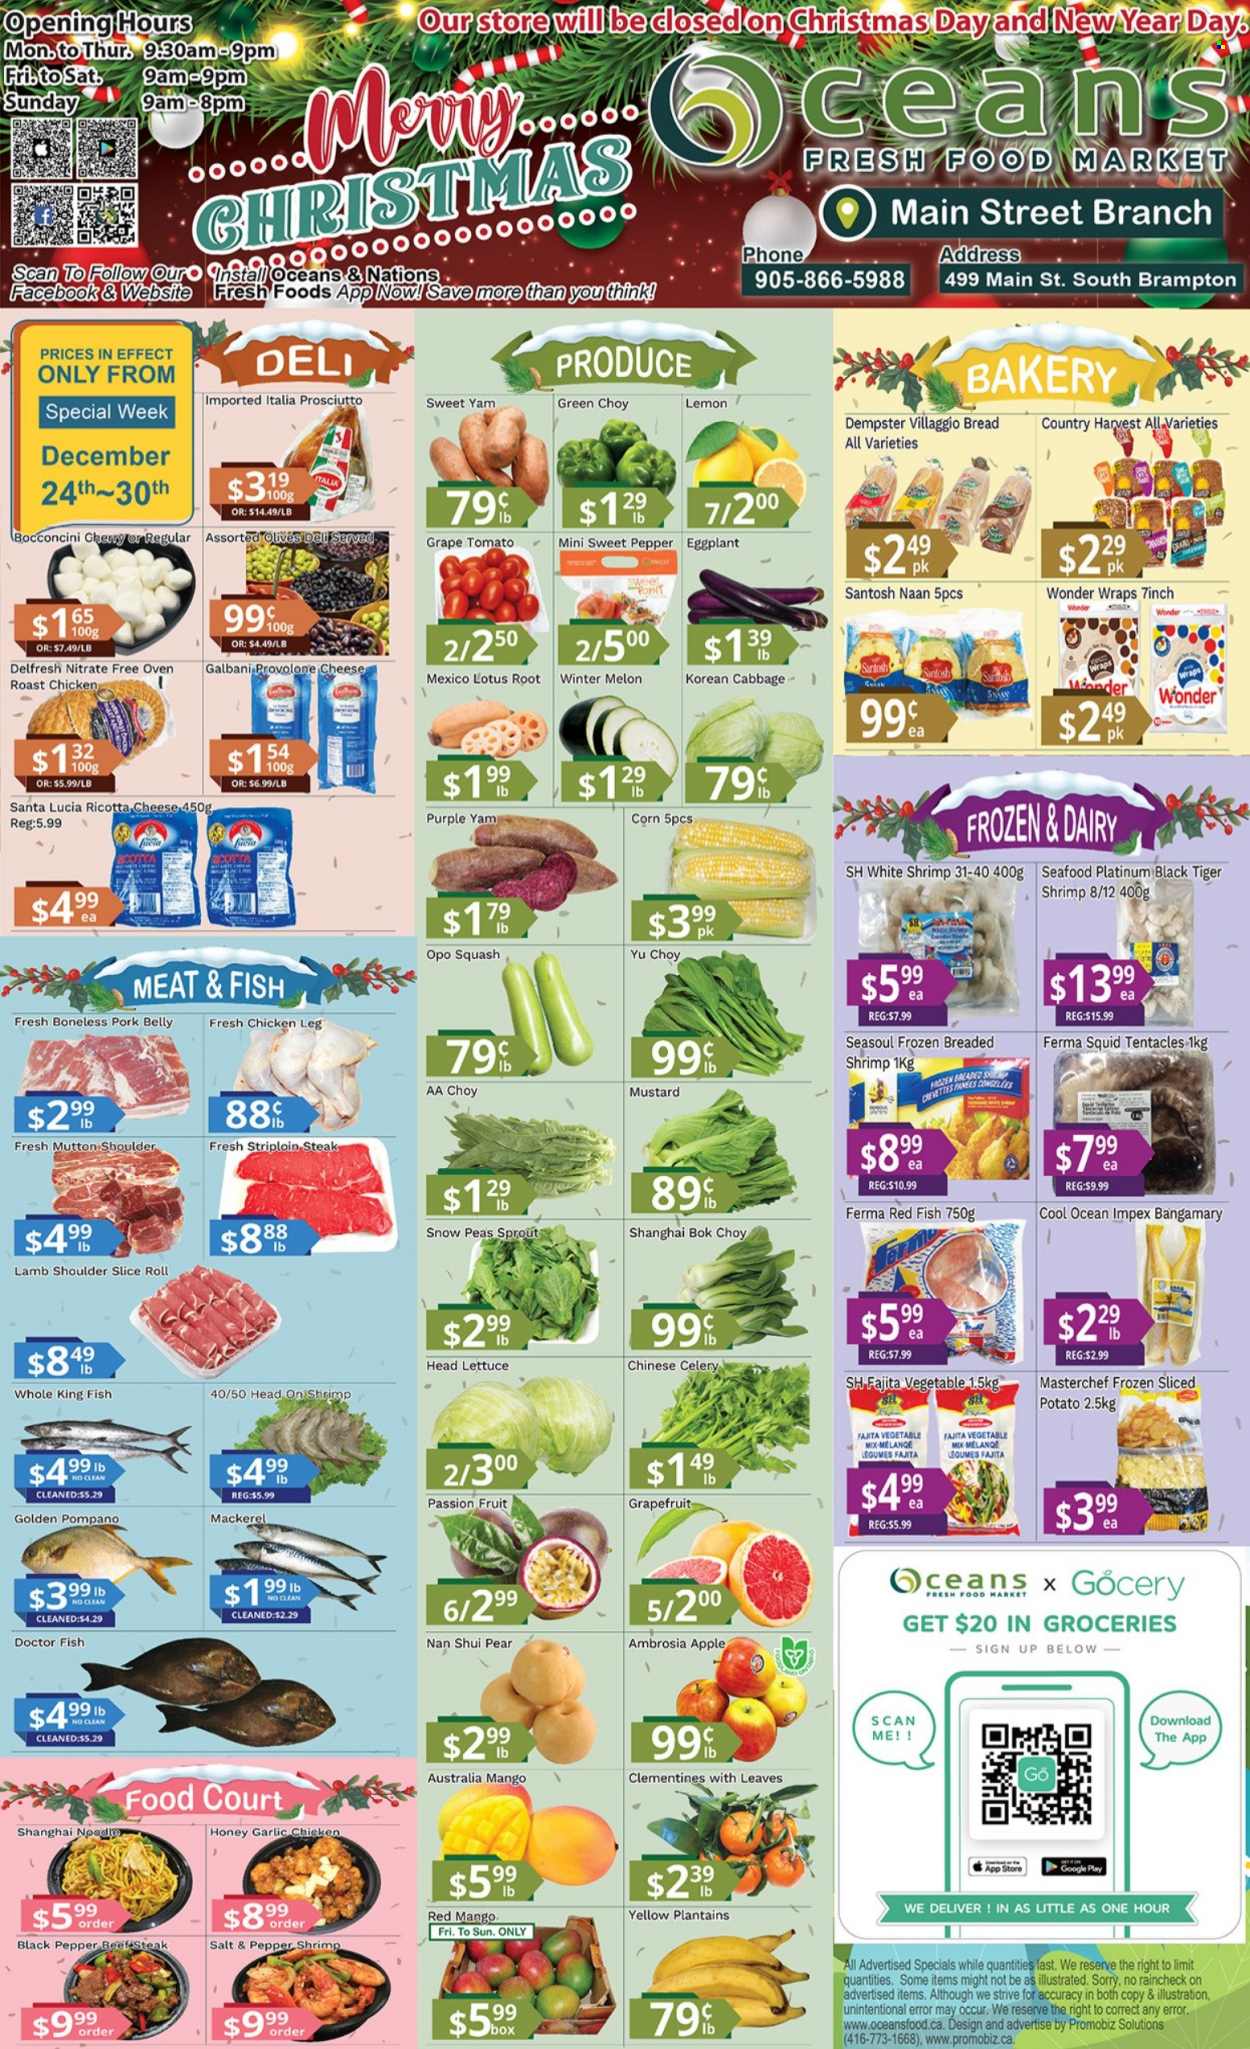 thumbnail - Oceans Flyer - December 24, 2021 - December 30, 2021 - Sales products - bread, wraps, bok choy, cabbage, celery, corn, garlic, peas, lettuce, eggplant, clementines, grapefruits, mango, plantains, pears, melons, mackerel, squid, pompano, seafood, fish, king fish, shrimps, chicken roast, fajita, noodles, prosciutto, bocconcini, cheese, Galbani, Provolone, snow peas, Country Harvest, Santa, black pepper, mustard, honey, chicken legs, beef meat, beef steak, striploin steak, pork belly, pork meat, lamb meat, lamb shoulder, mutton meat, Lotus, ricotta, olives, steak. Page 1.